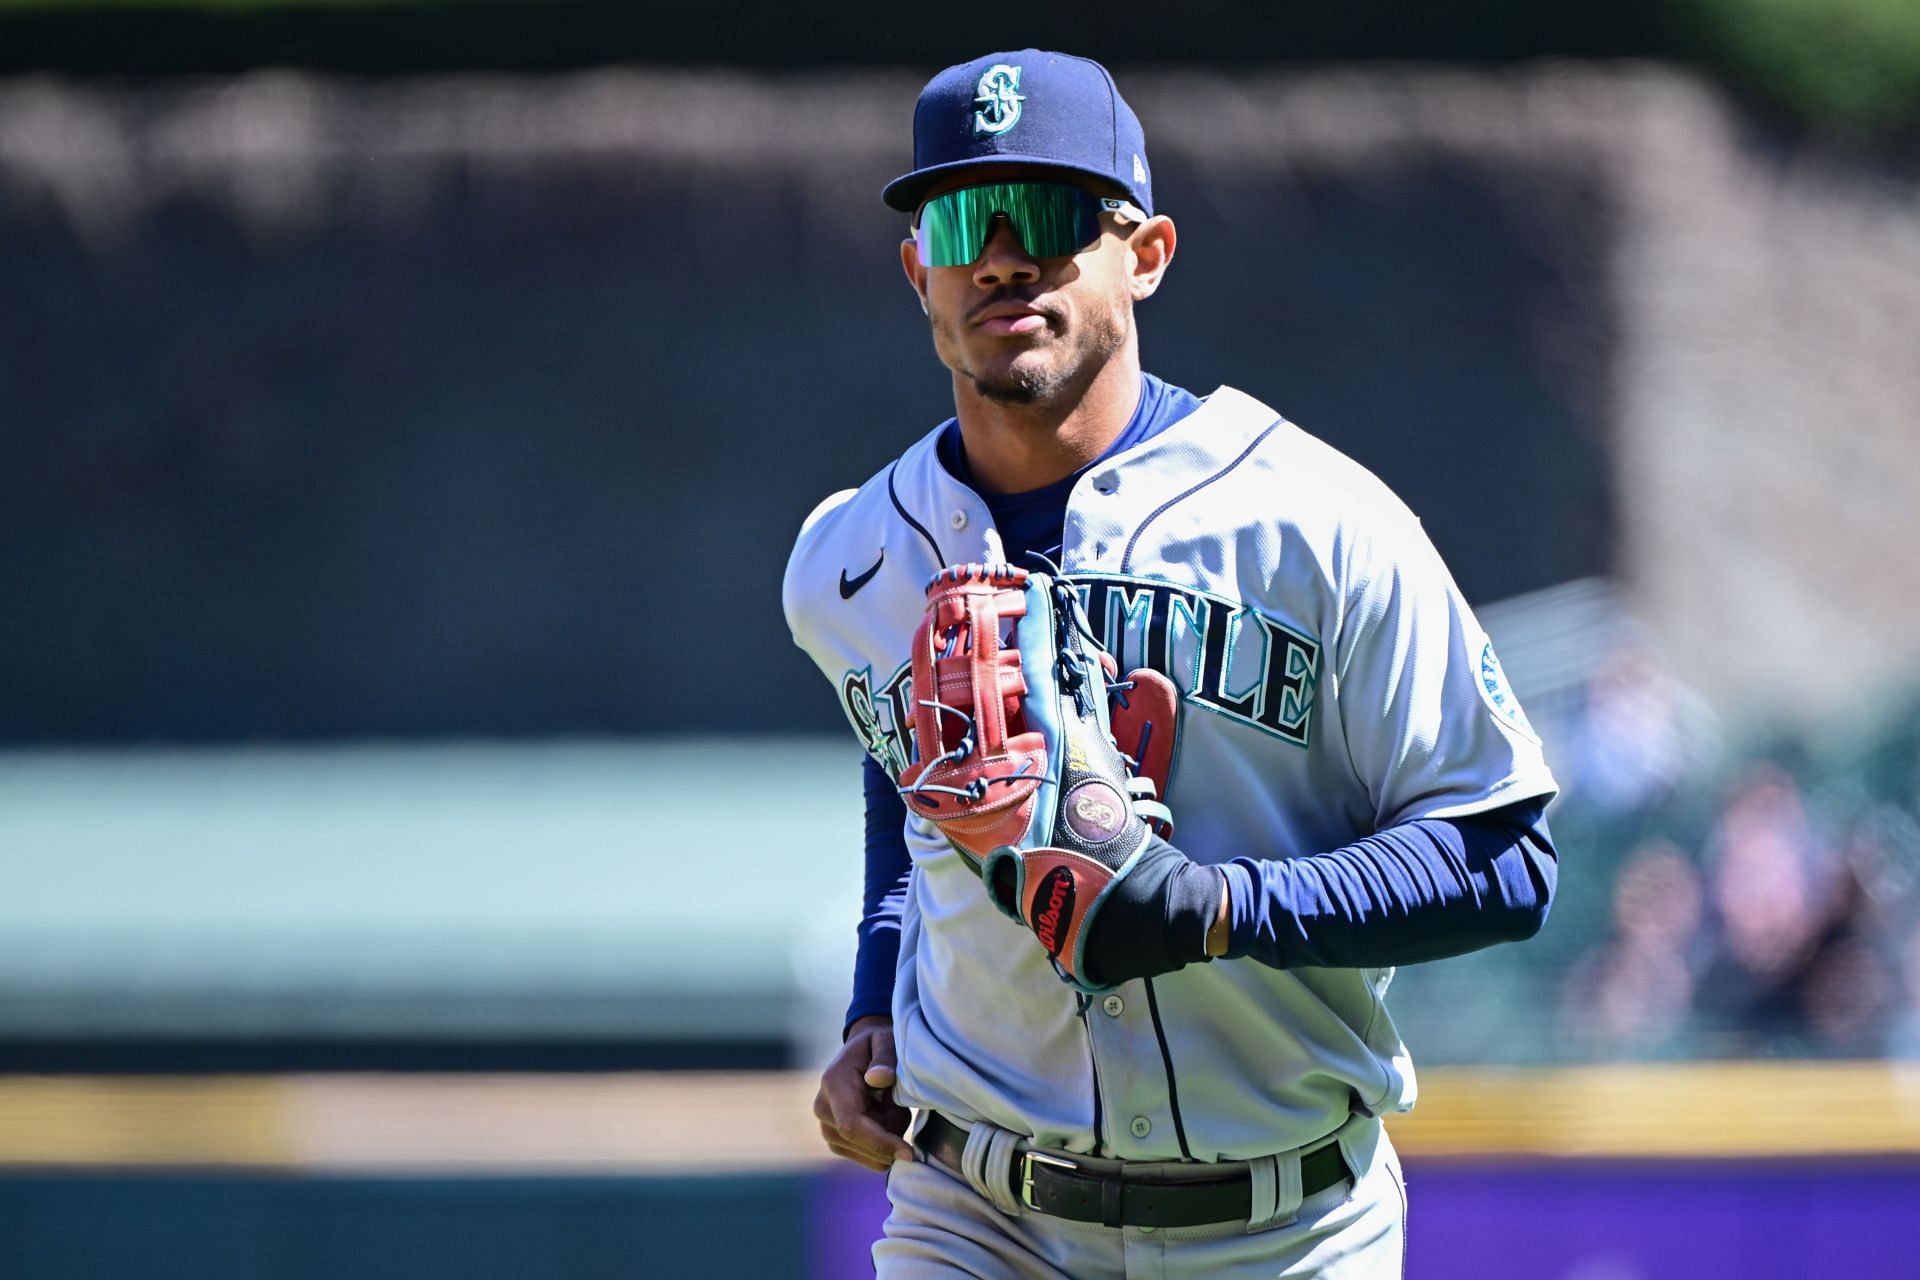 Seattle Mariners OF Julio Rodriguez is playing his first season in the Bigs this year